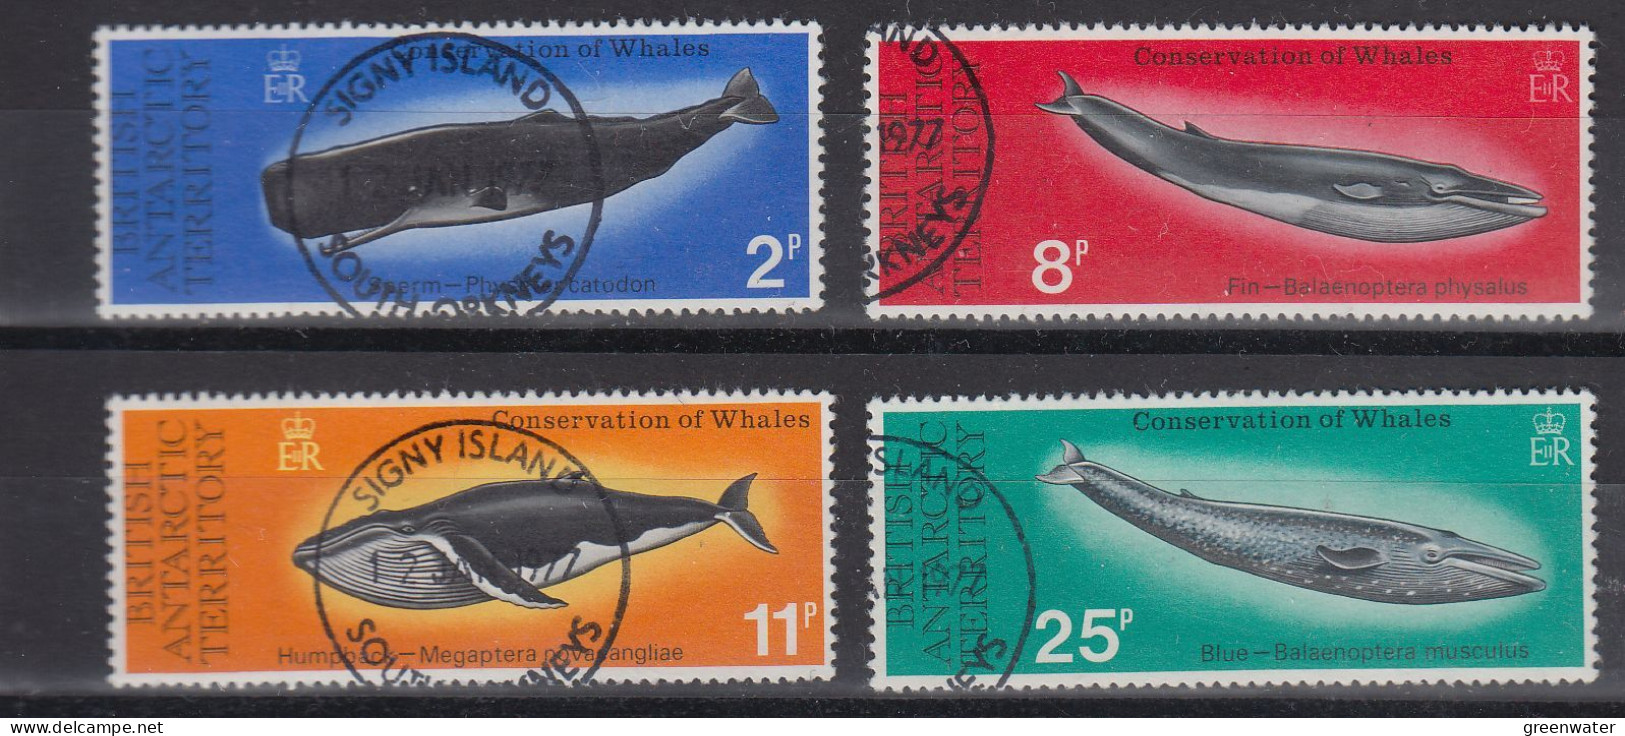 British Antarctic Territorry (BAT) 1977 Whale Conservation 4v Used "Signy Island"  (58711) - Used Stamps